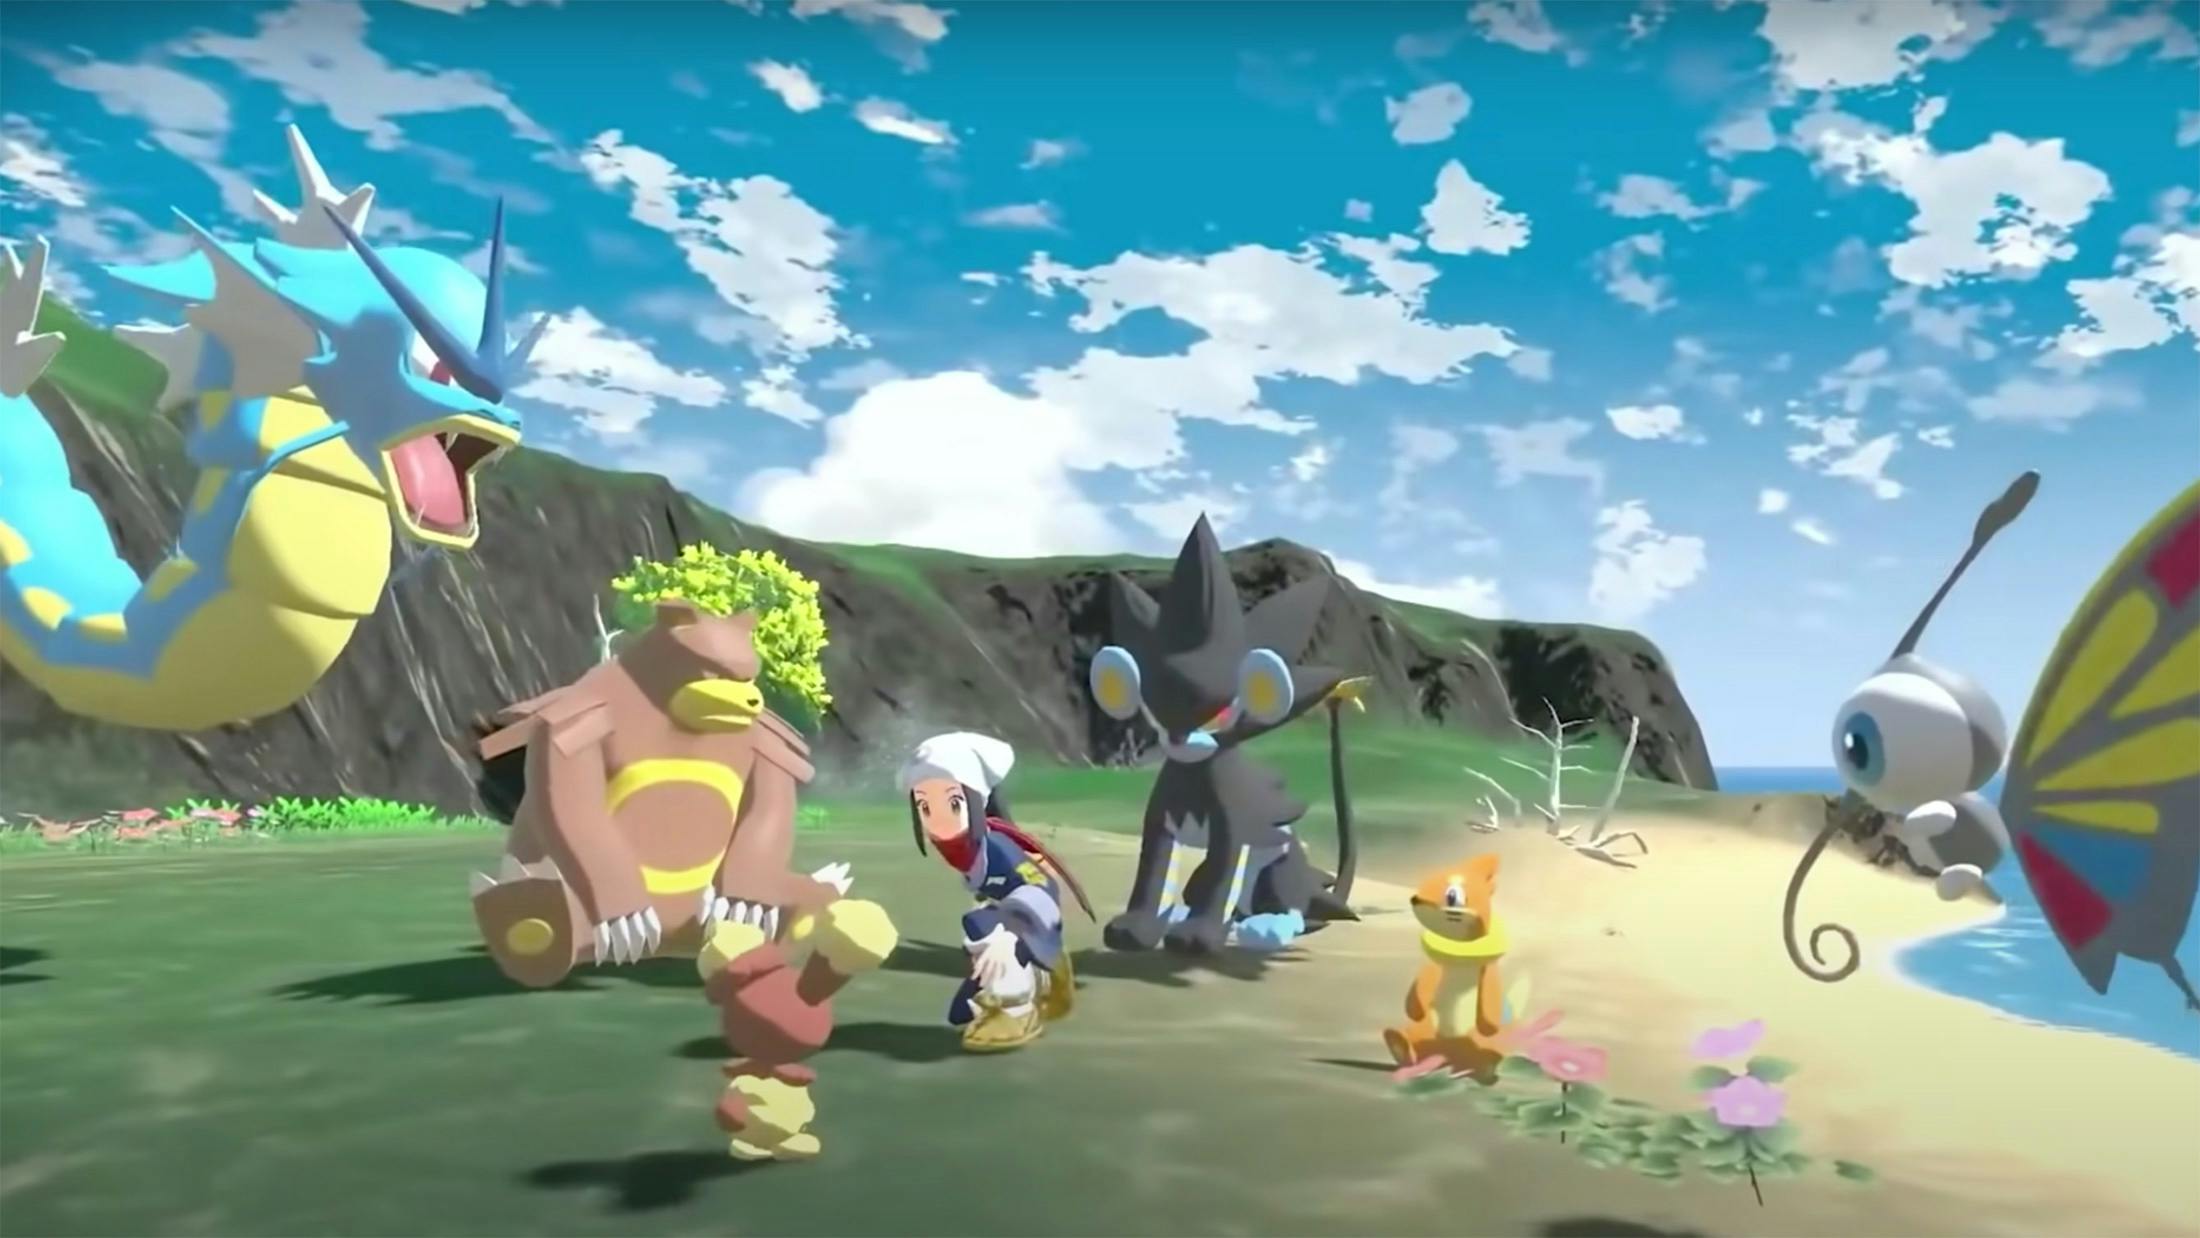 Will Pokémon Legends: Arceus be the game that original fans have been craving?